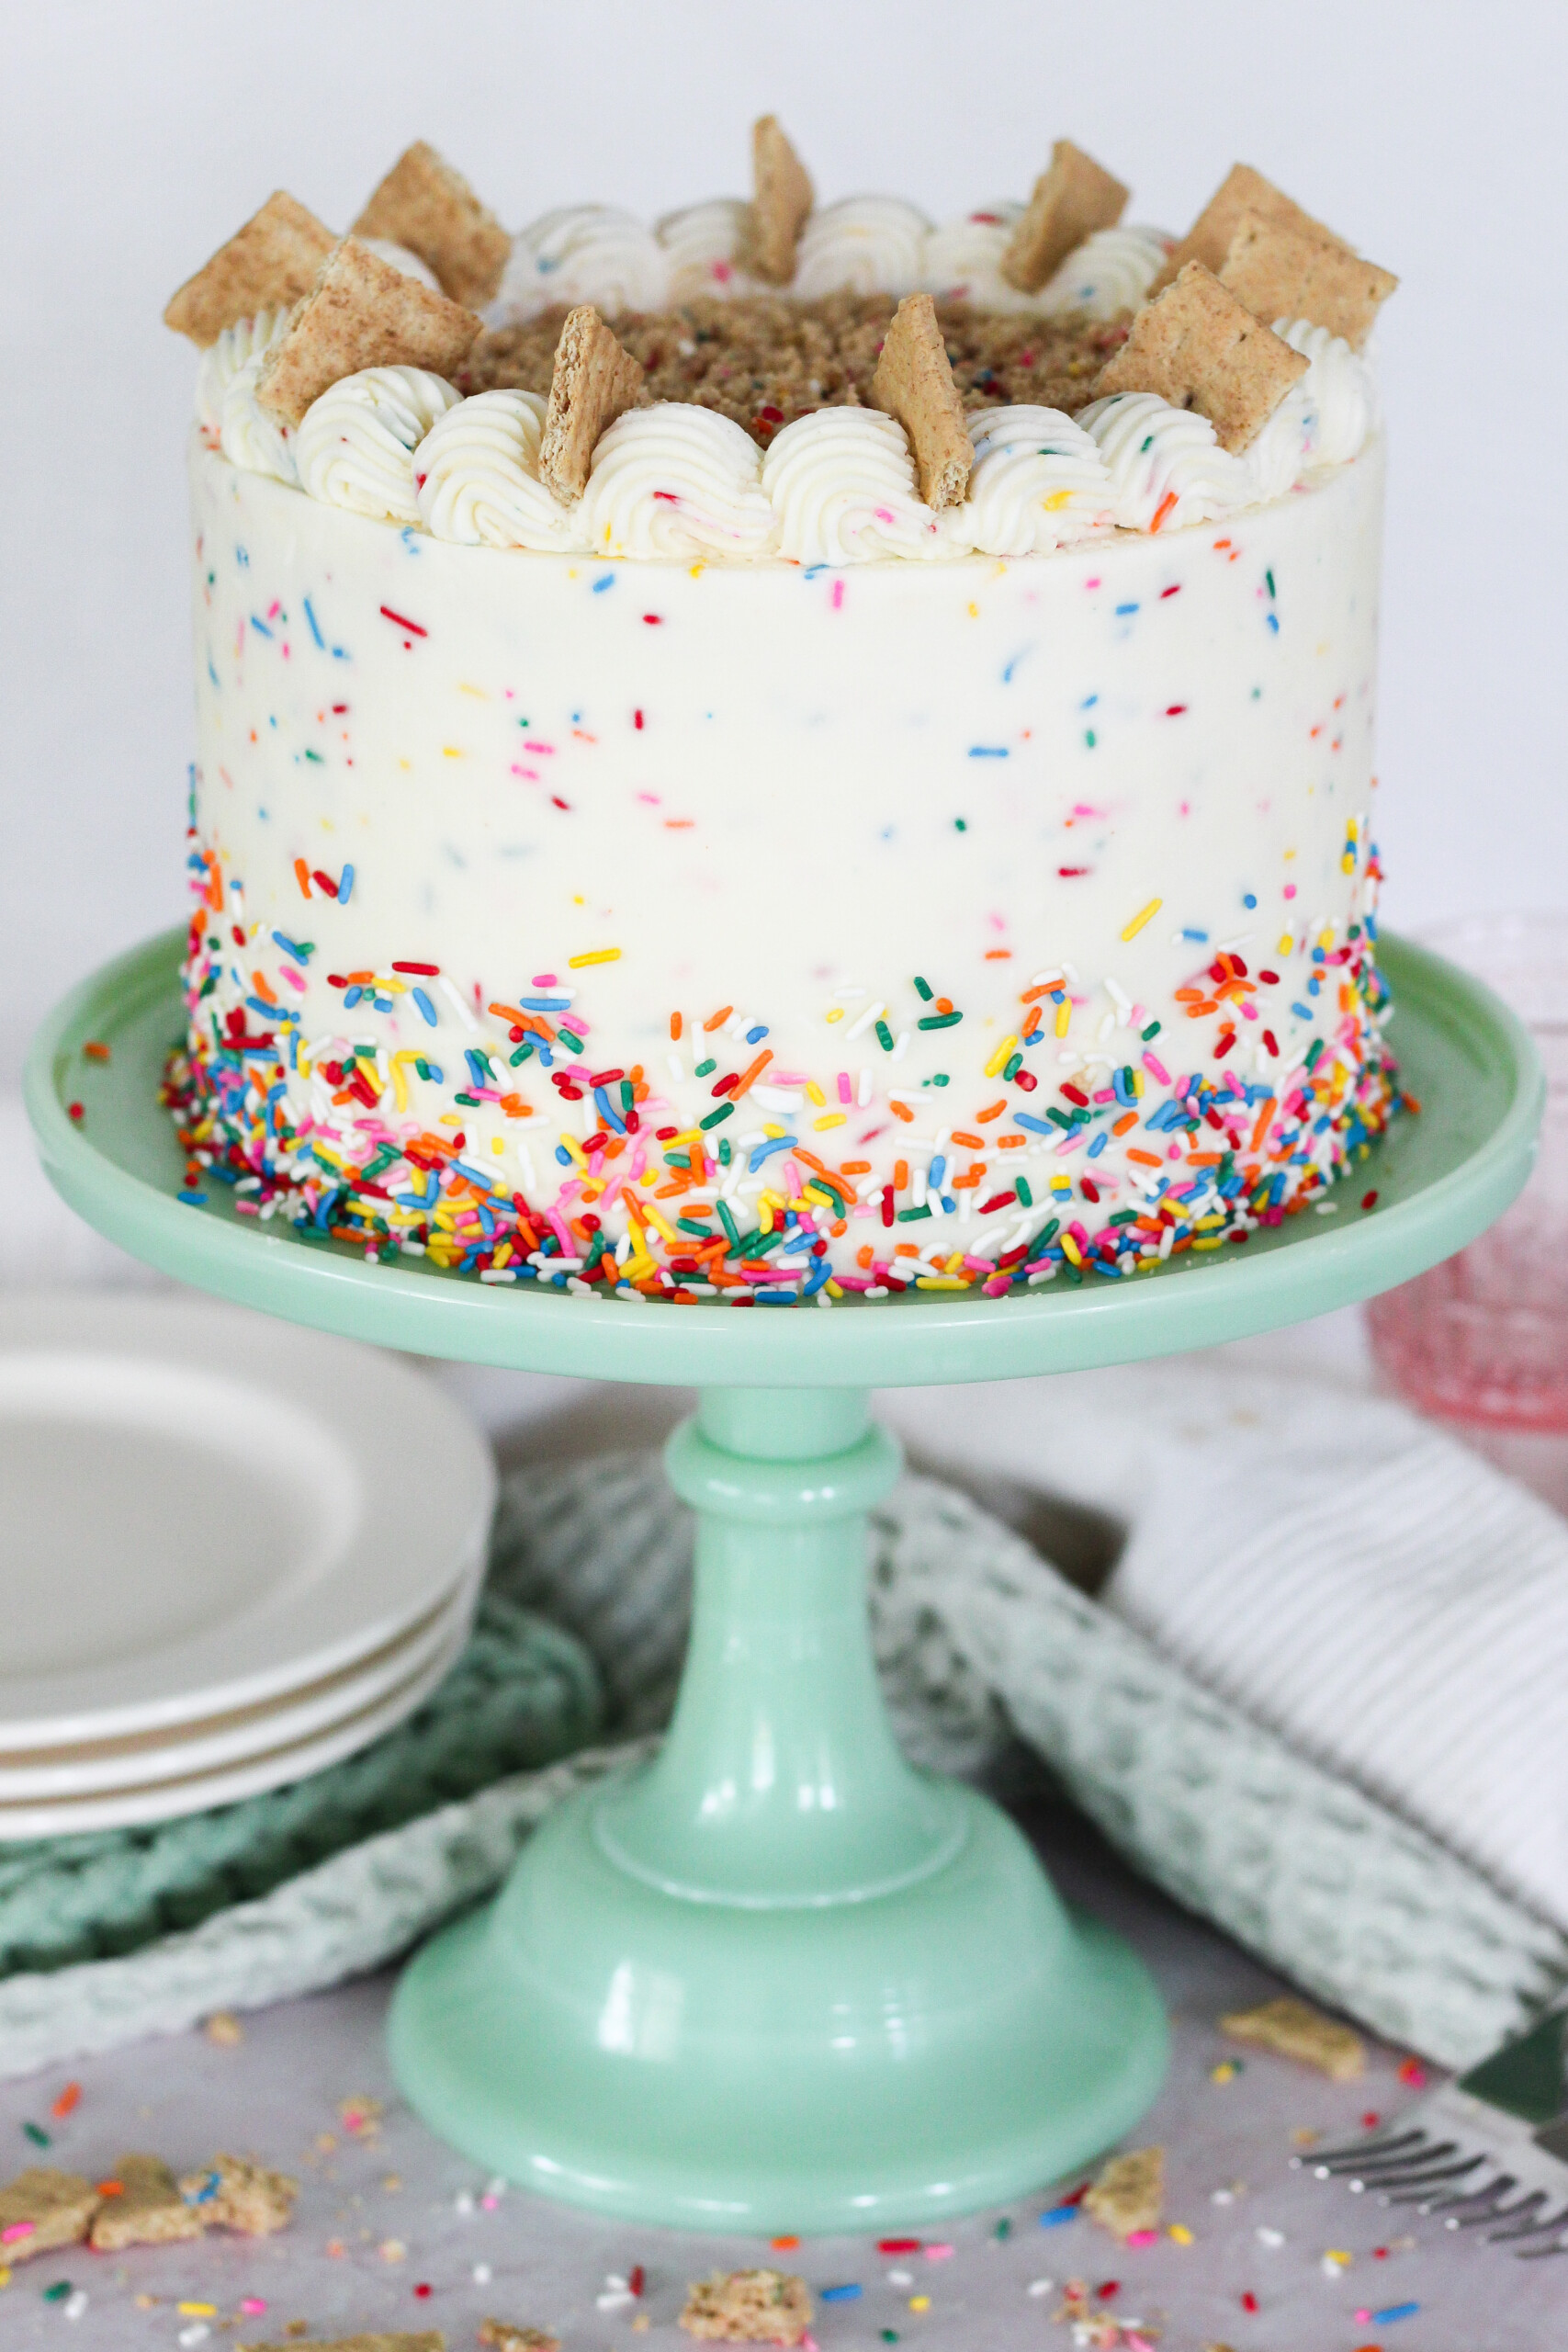 A confetti cake on a green cake stand.